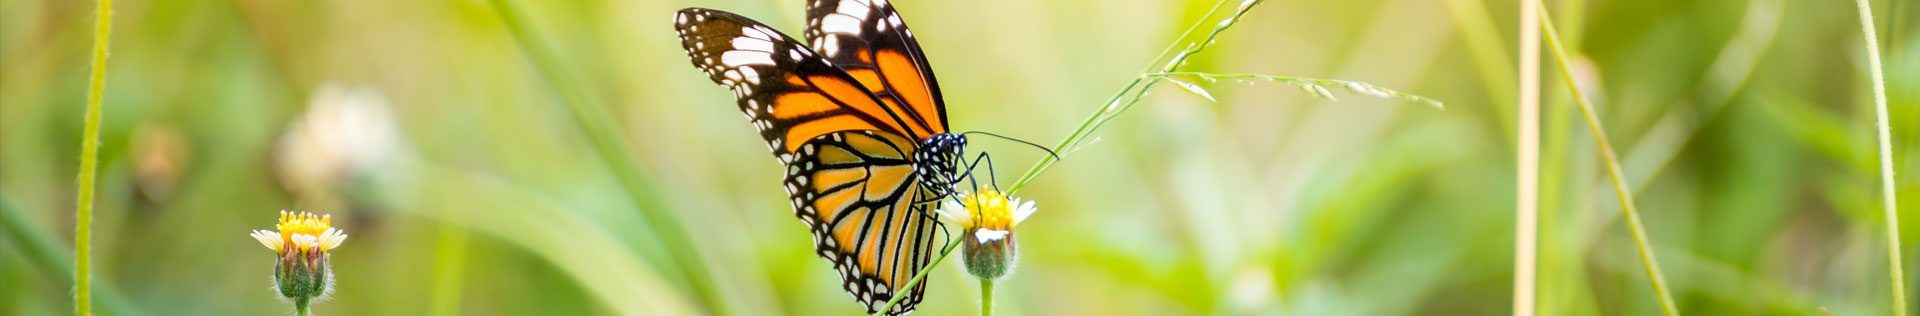 A close up photo of a monarch butterfly on the bud of a flower